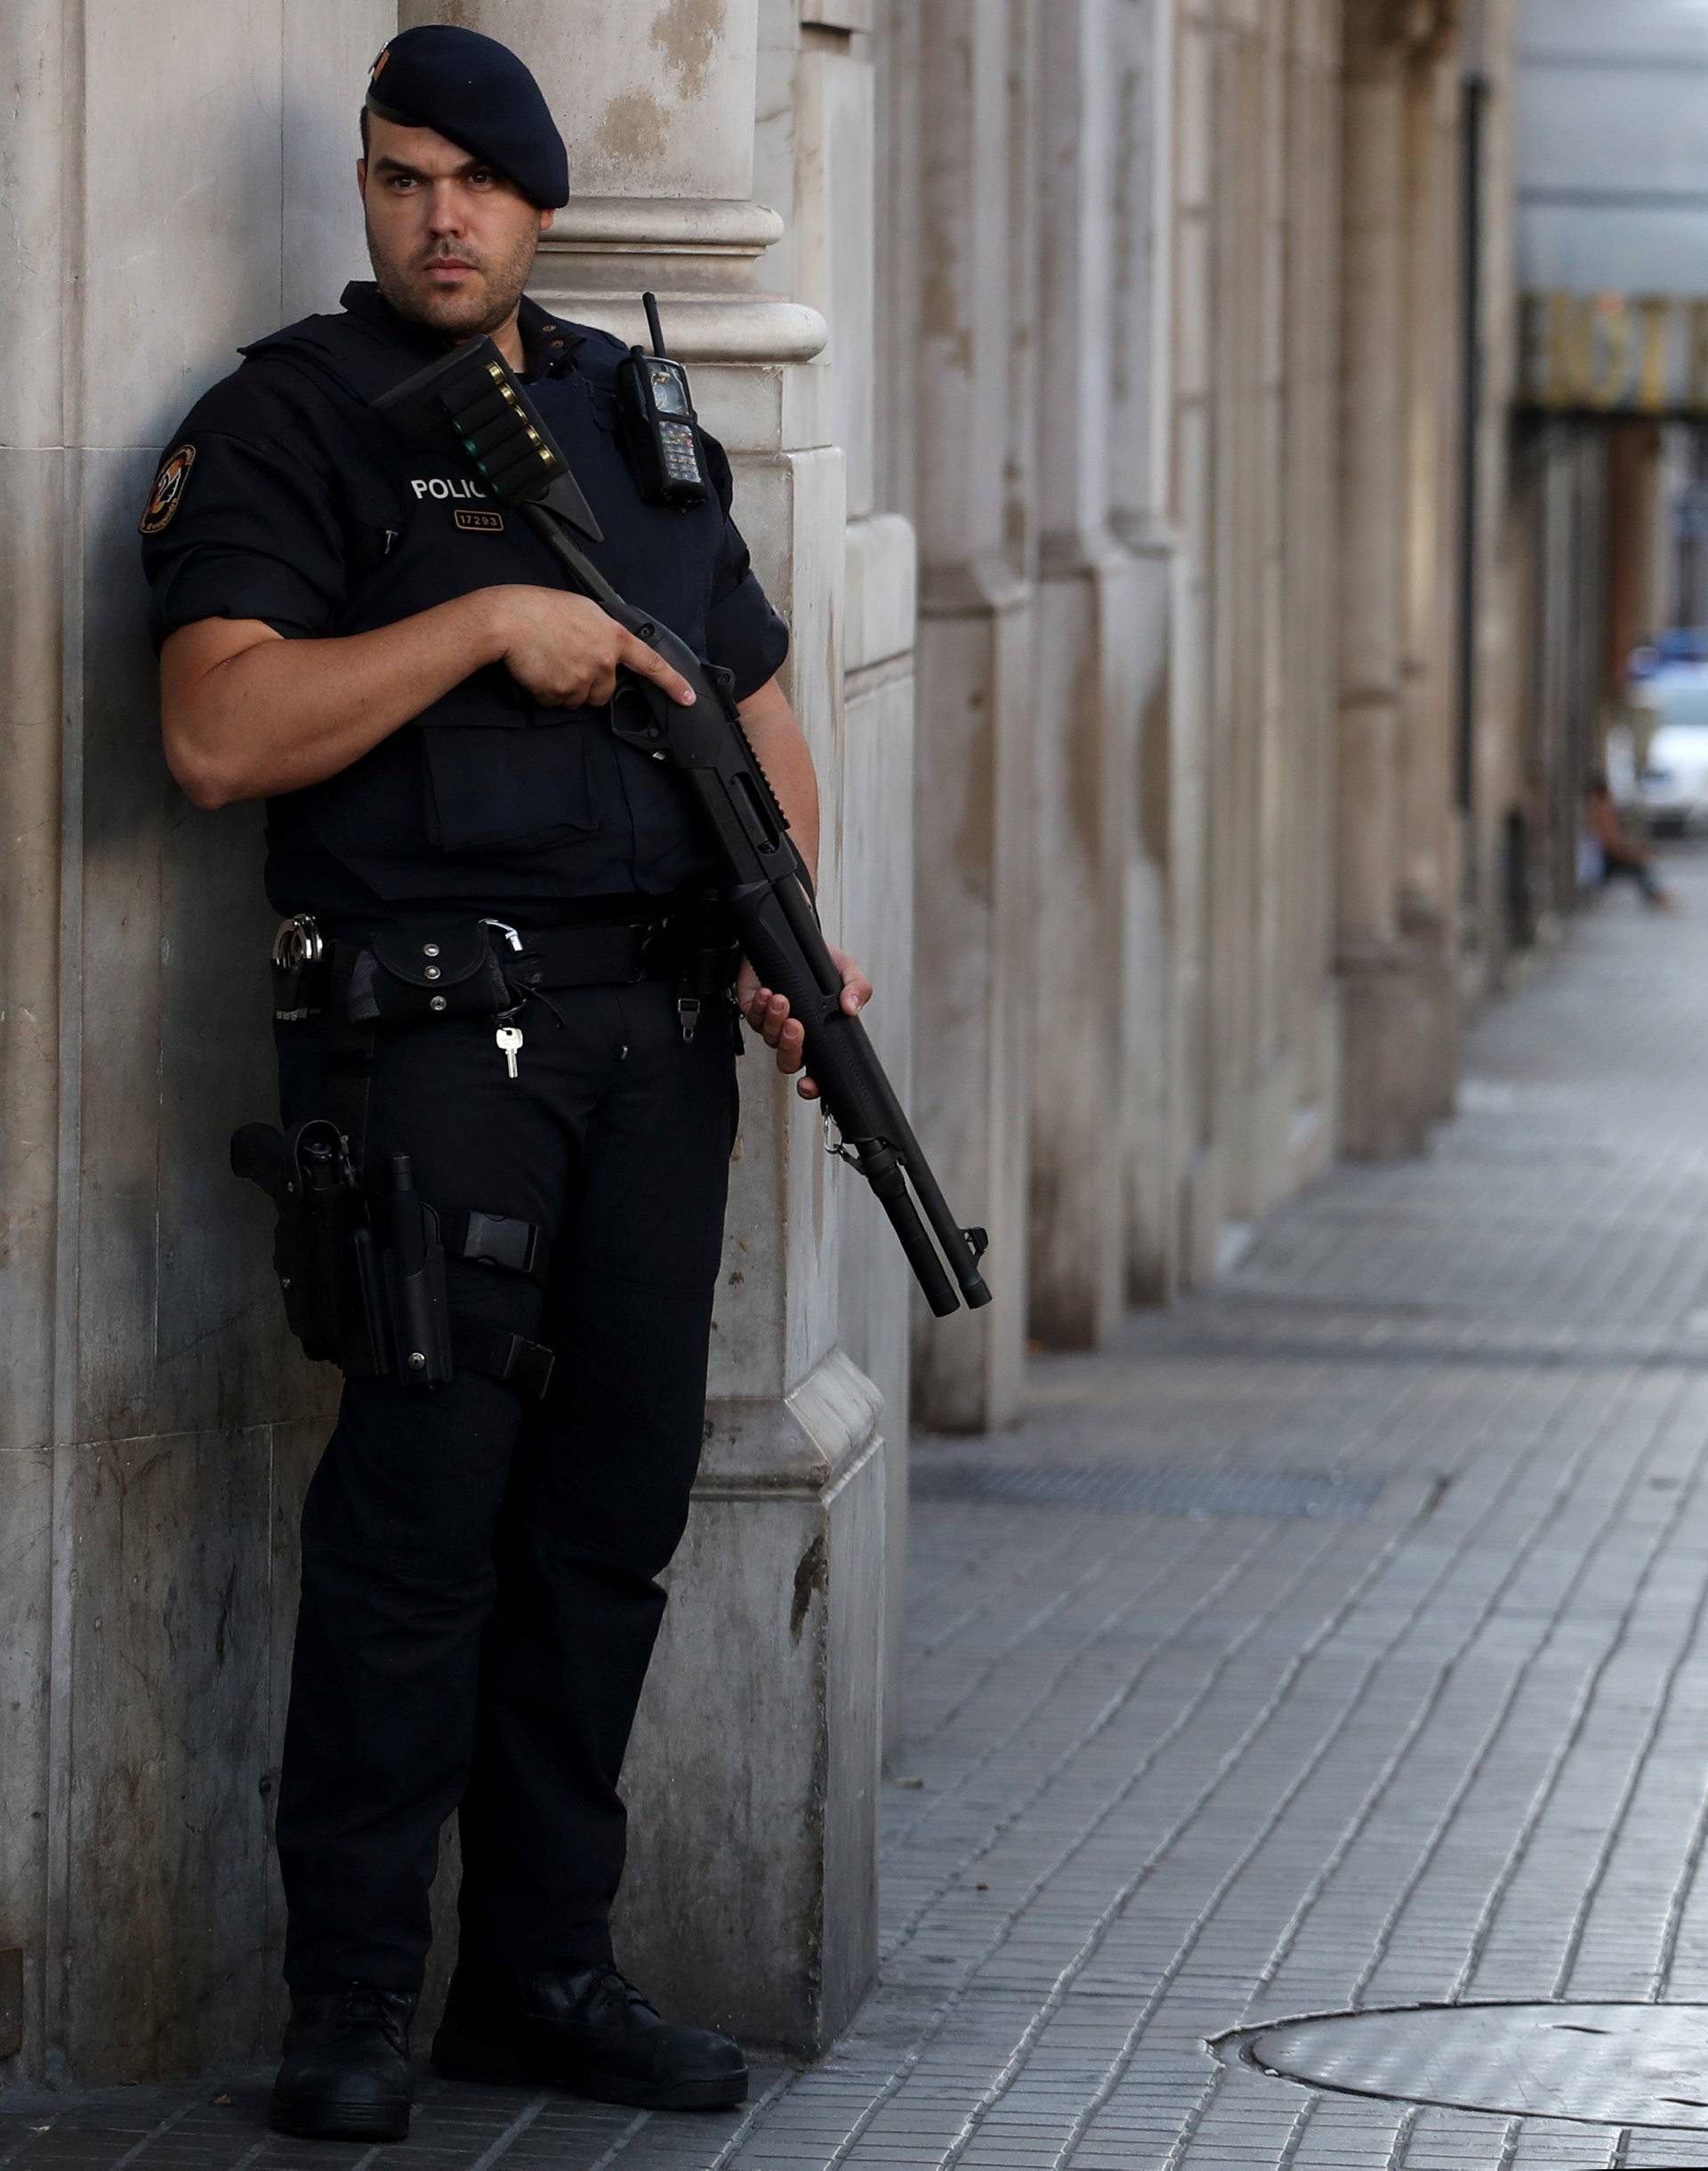 Armed Catalan Mossos d'esquadra officers stand guard at Las Ramblas street where a van crashed into pedestrians in Barcelona